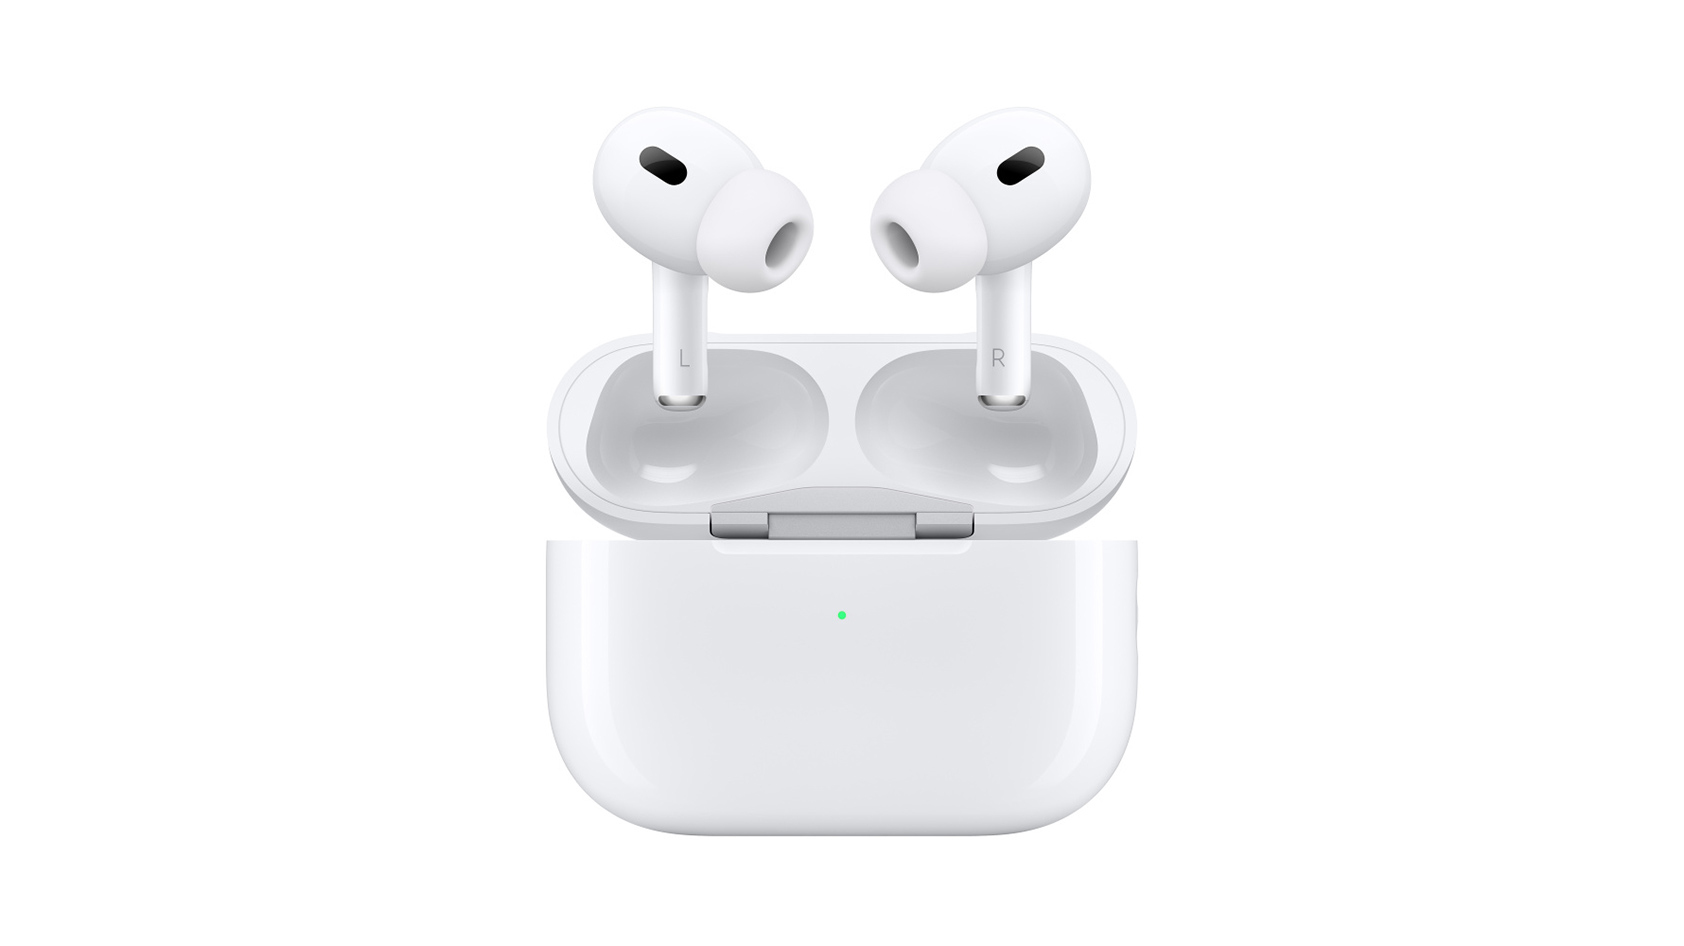 The Apple AirPods Pro (2nd generation) wireless earphones in white coming out of the MagSafe charging case which stands vertically.